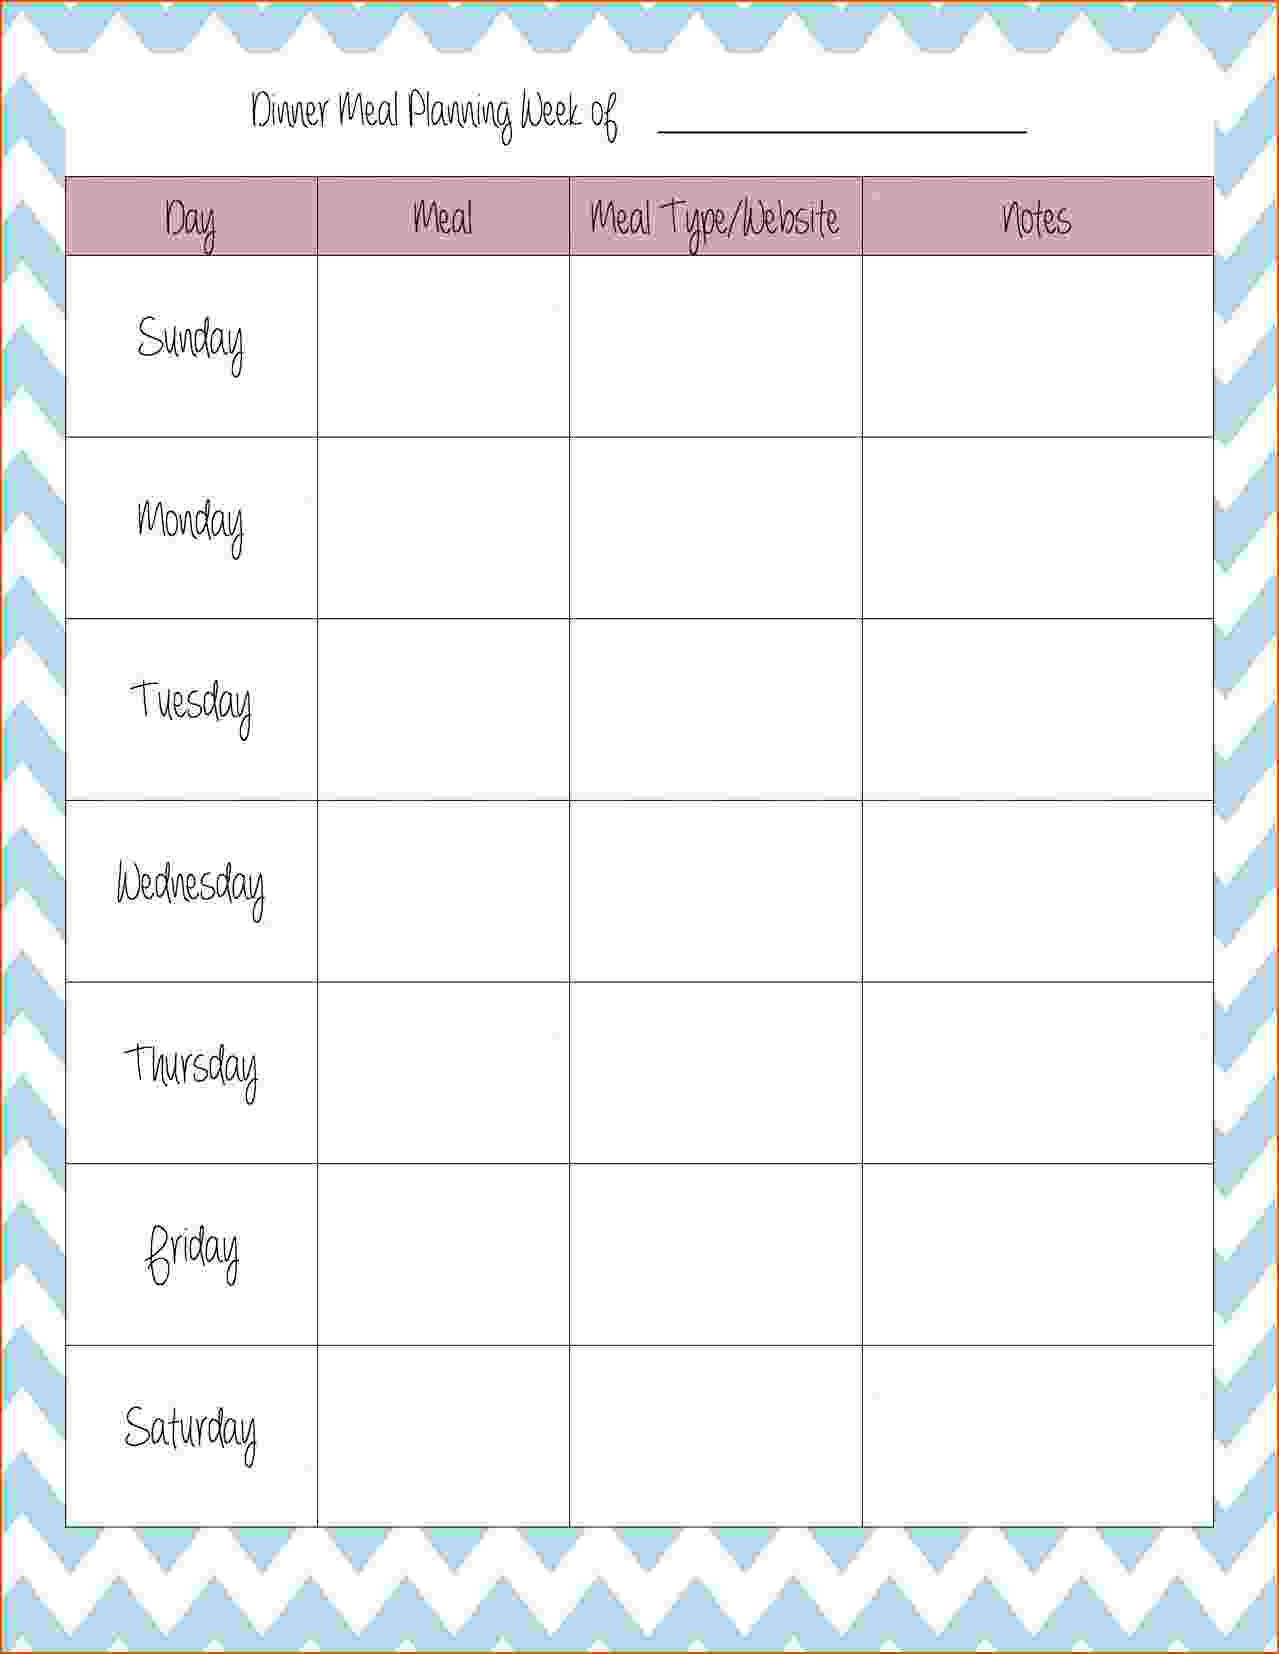 45 Printable Weekly Meal Planner Templates KittyBabyLove